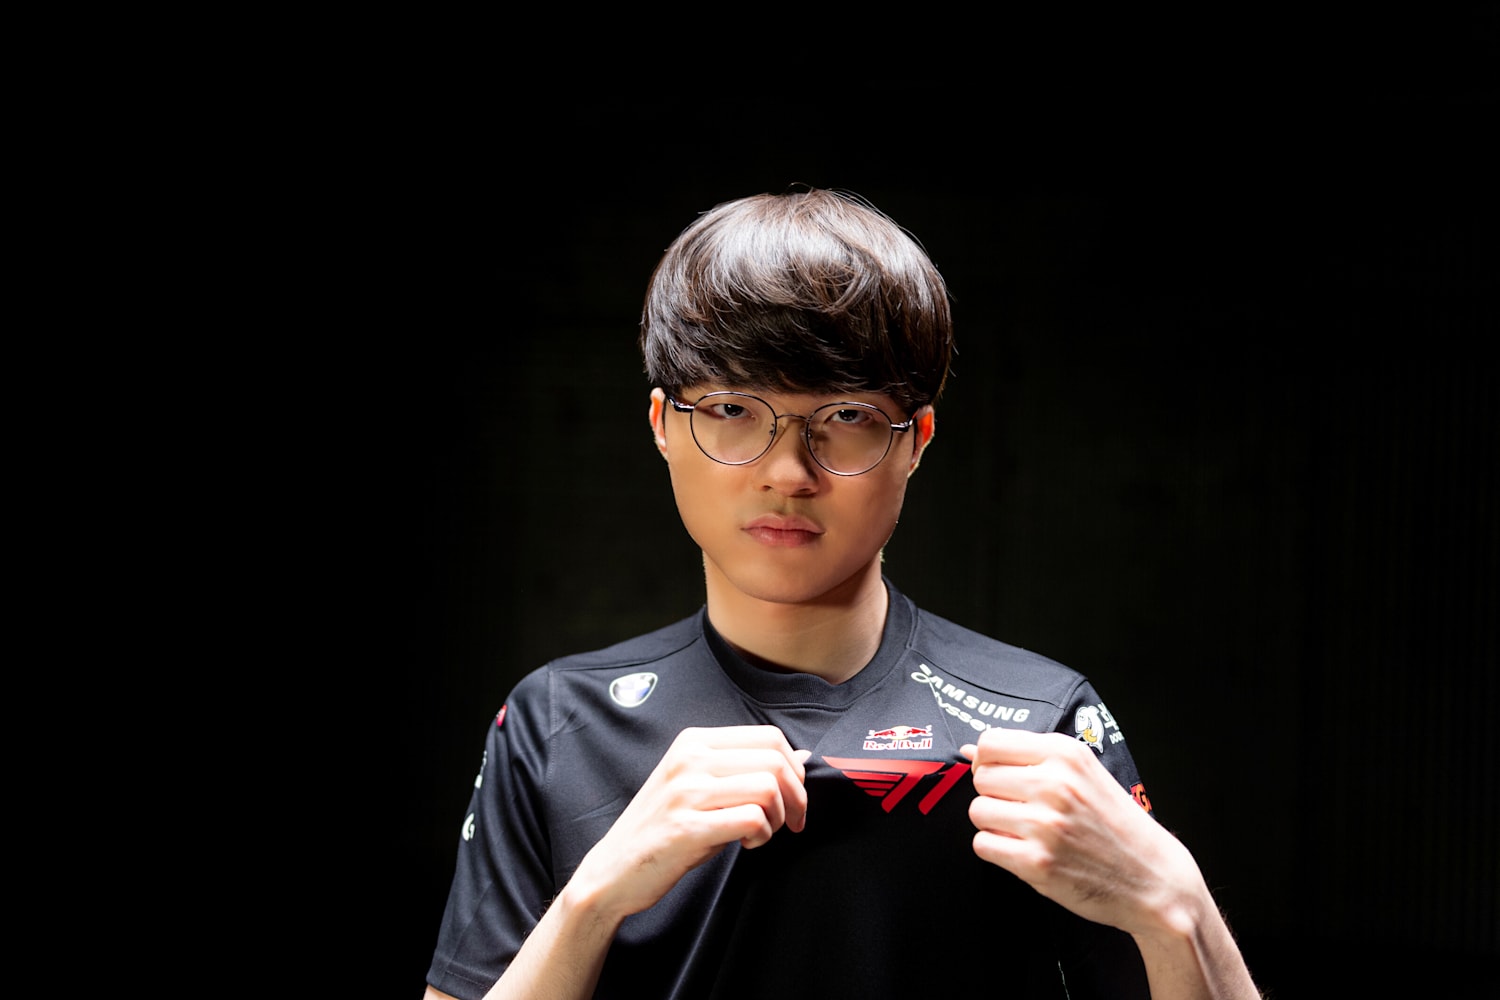 Meet Faker, the enigmatic phenom who could become eSports’ first crossover star | For The Win